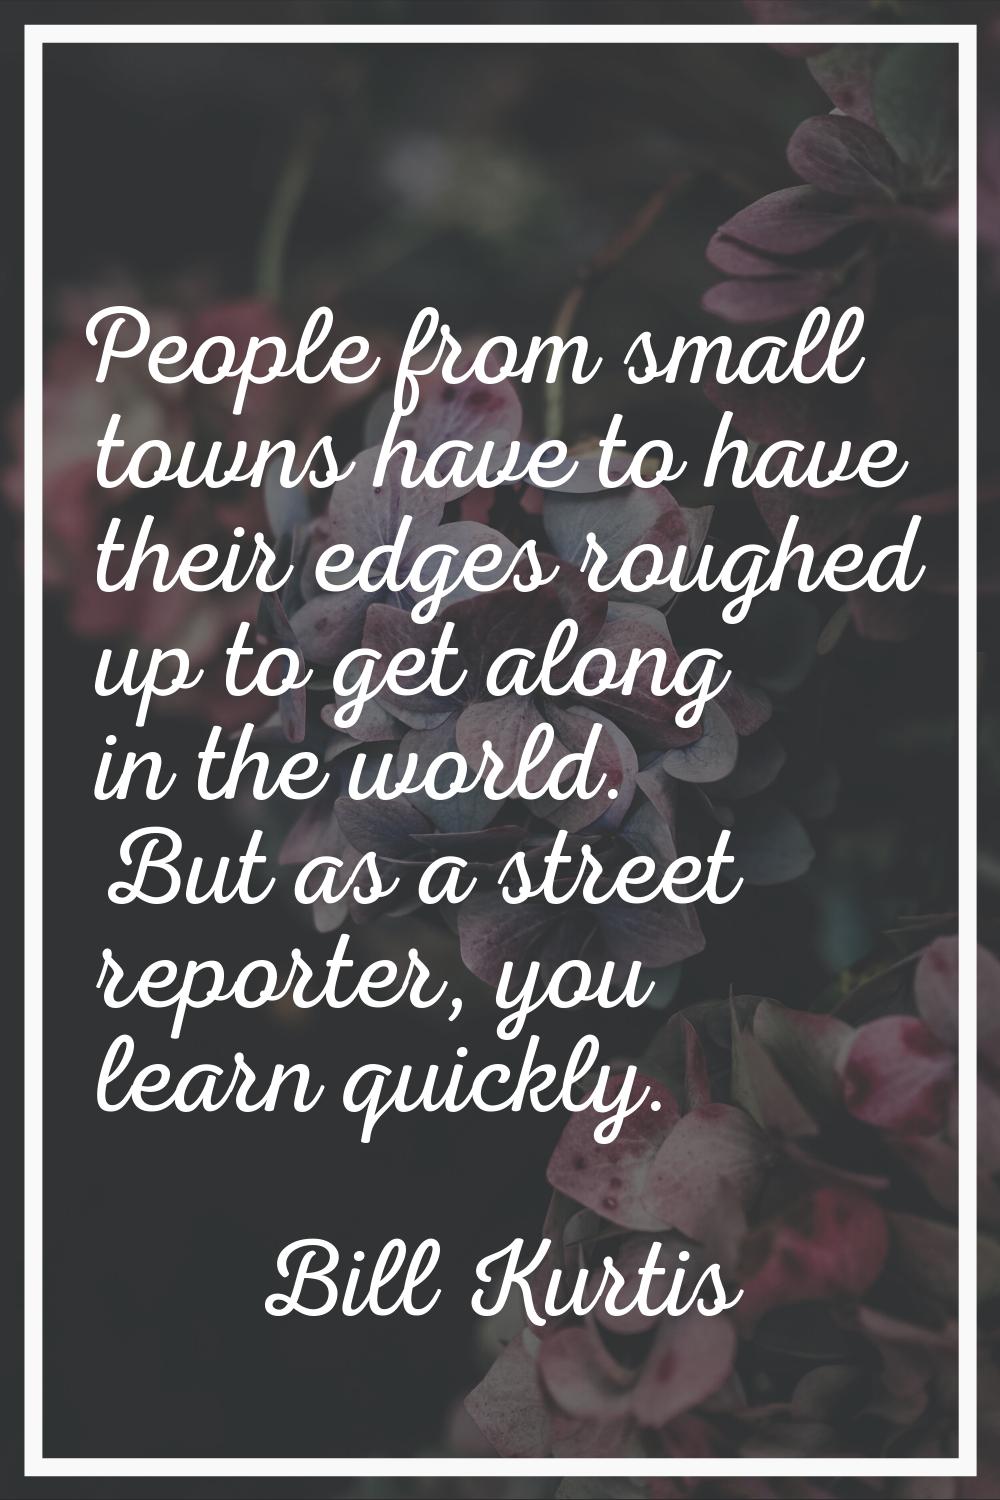 People from small towns have to have their edges roughed up to get along in the world. But as a str